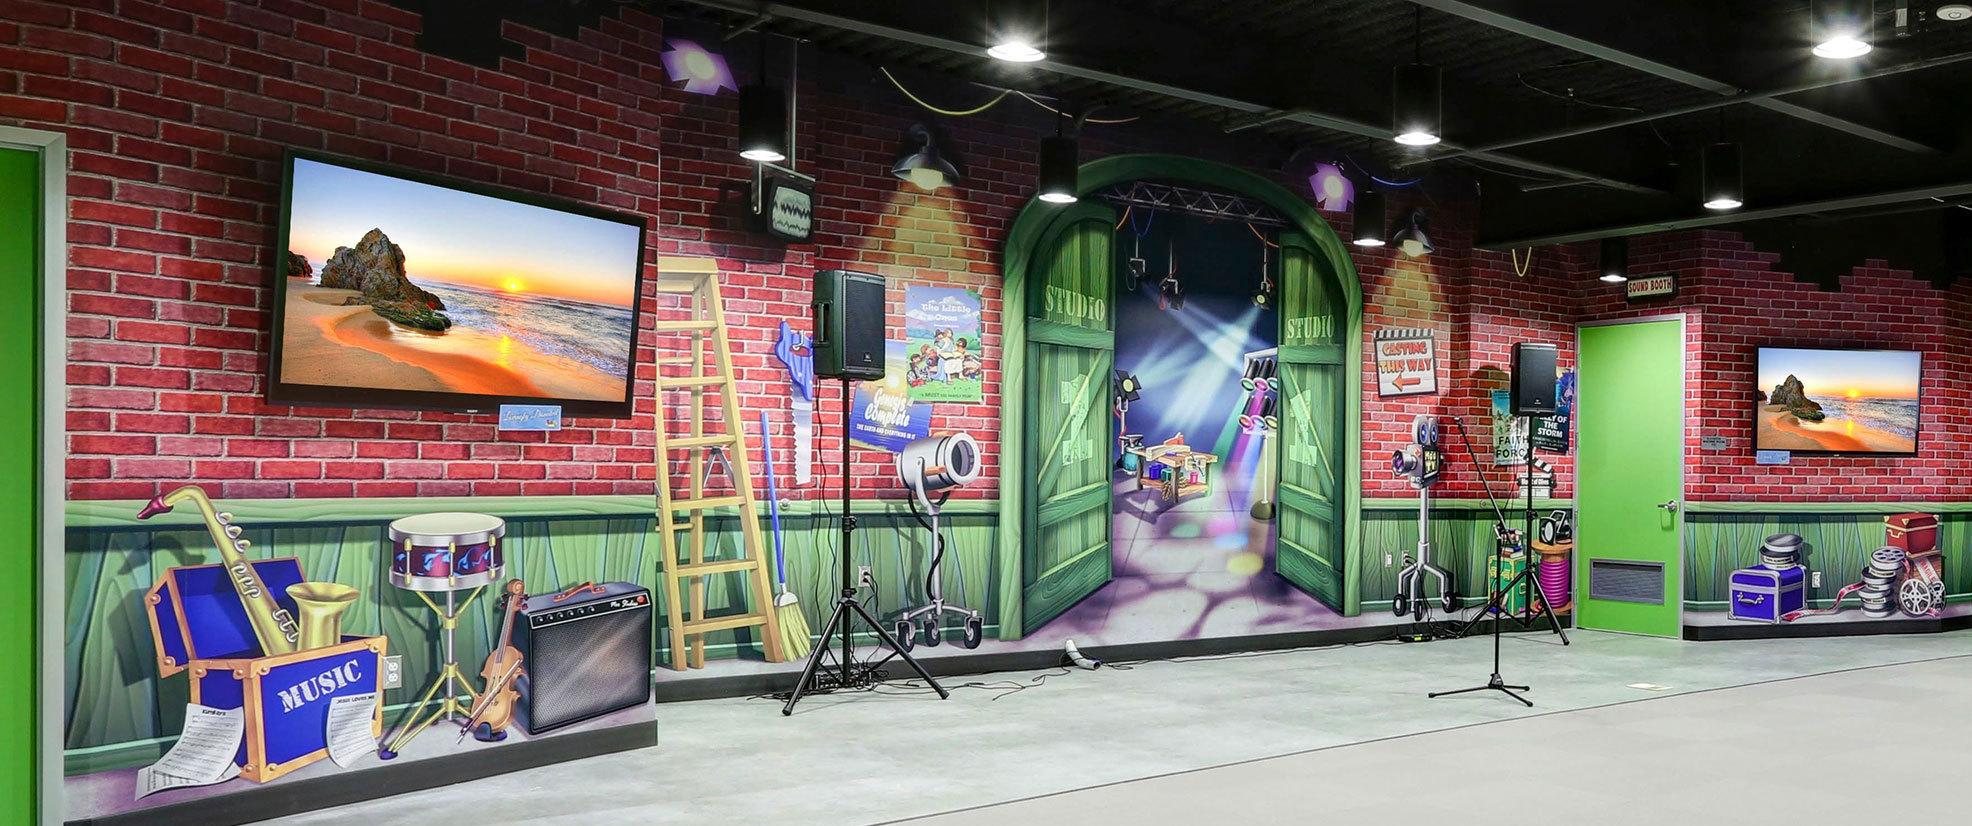 Backlot Studios Themed Wall Covering Stage Backdrop featuring a brick wall, green board wainscots, props, lights, tools and more at Mount of Olives